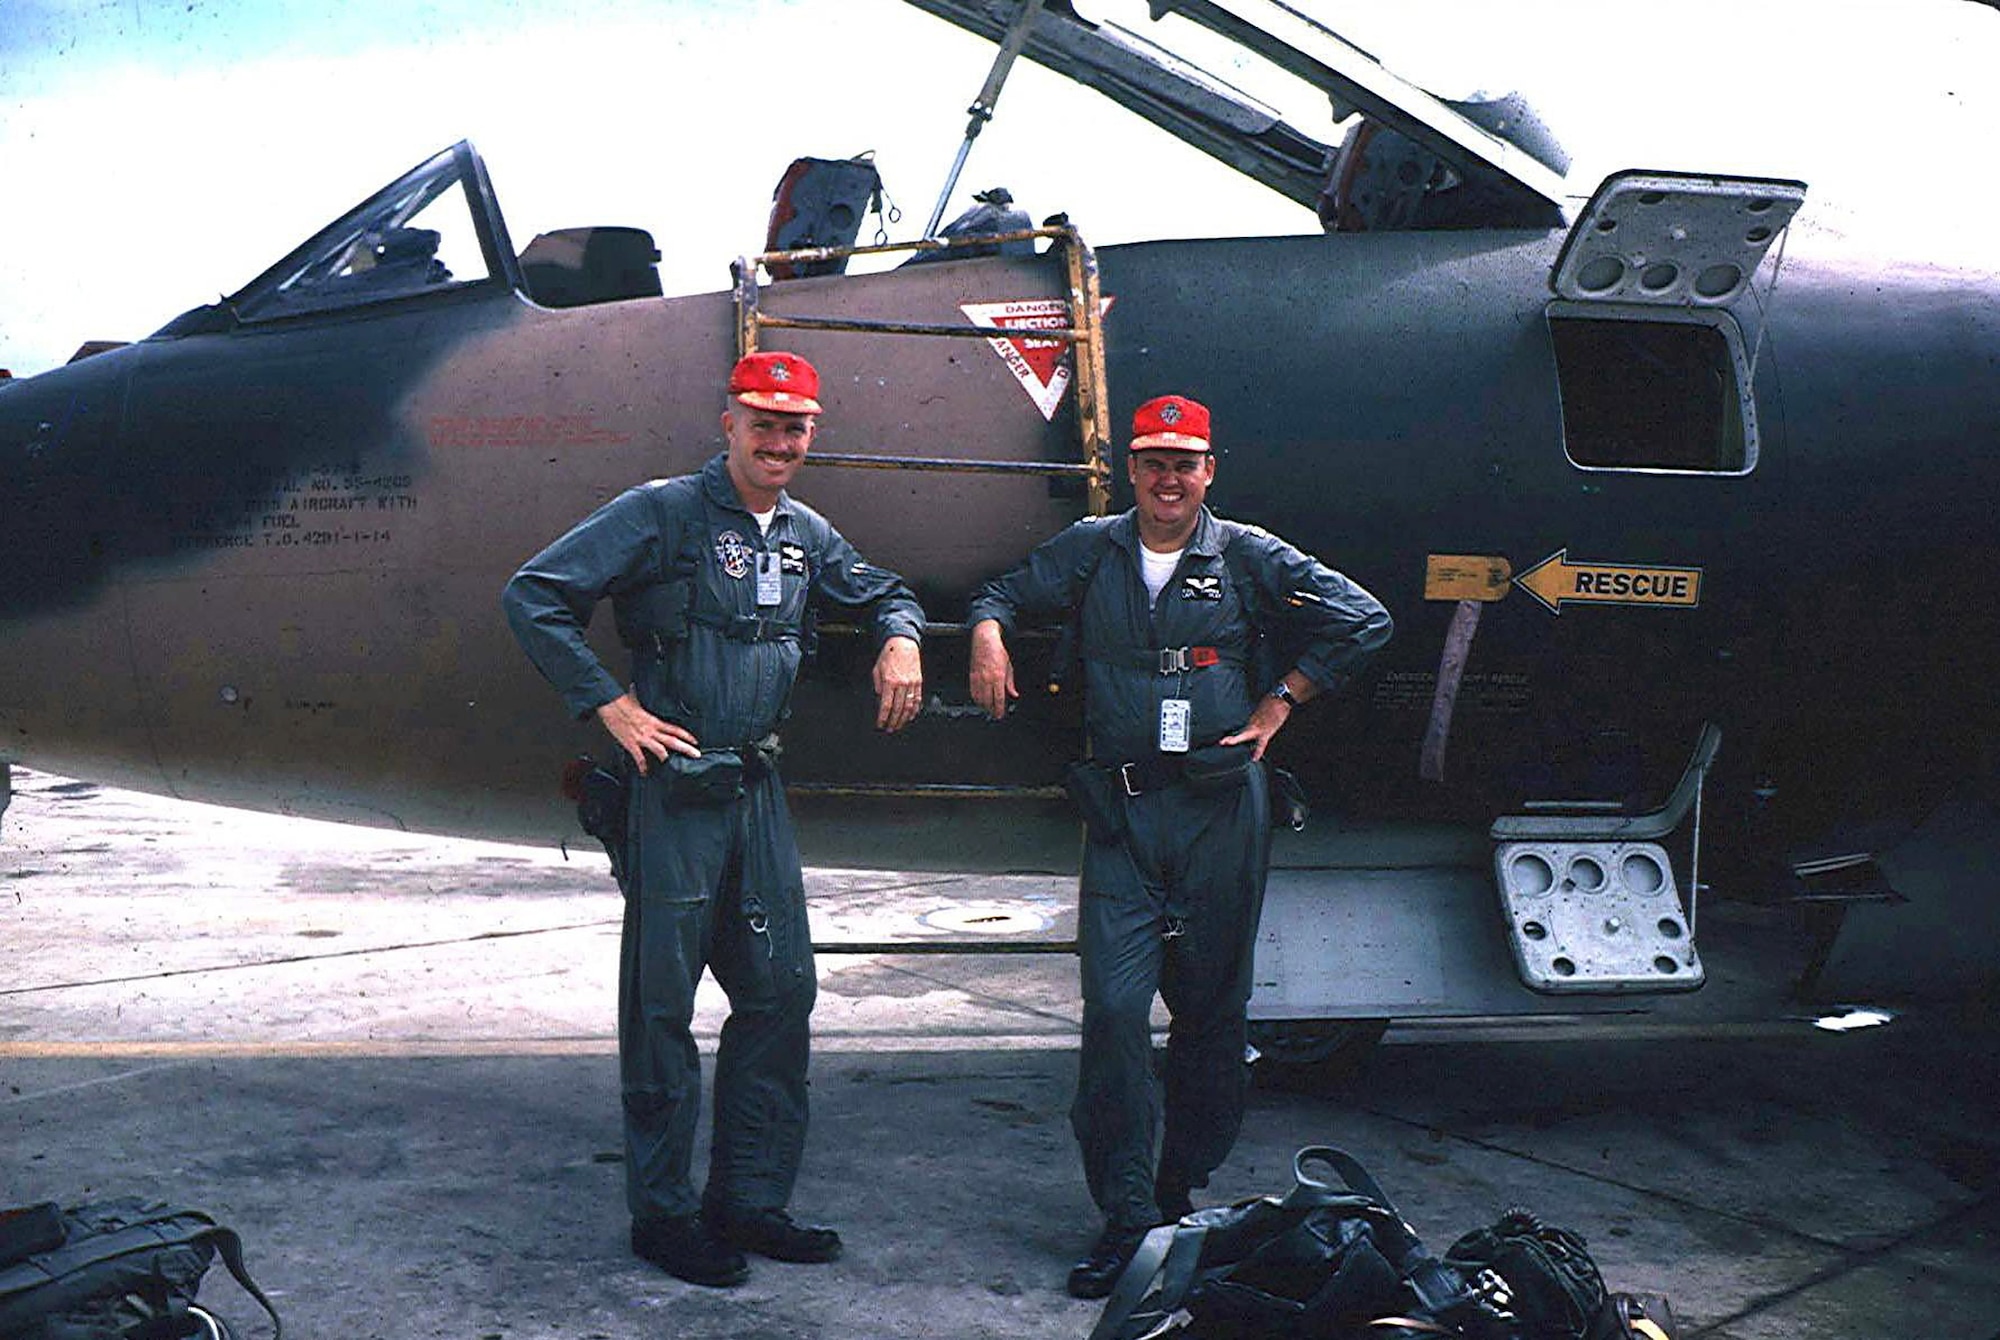 WHITEMAN AIR FORCE BASE, Mo., -- Capt. Bob Butterfield (left) and his navigator, Capt. Hugh Davidson, pose in front of their 13th Bomb Squadron B-57 after flying a mission in Vietnam. (U.S. Air Force courtesy photo)
